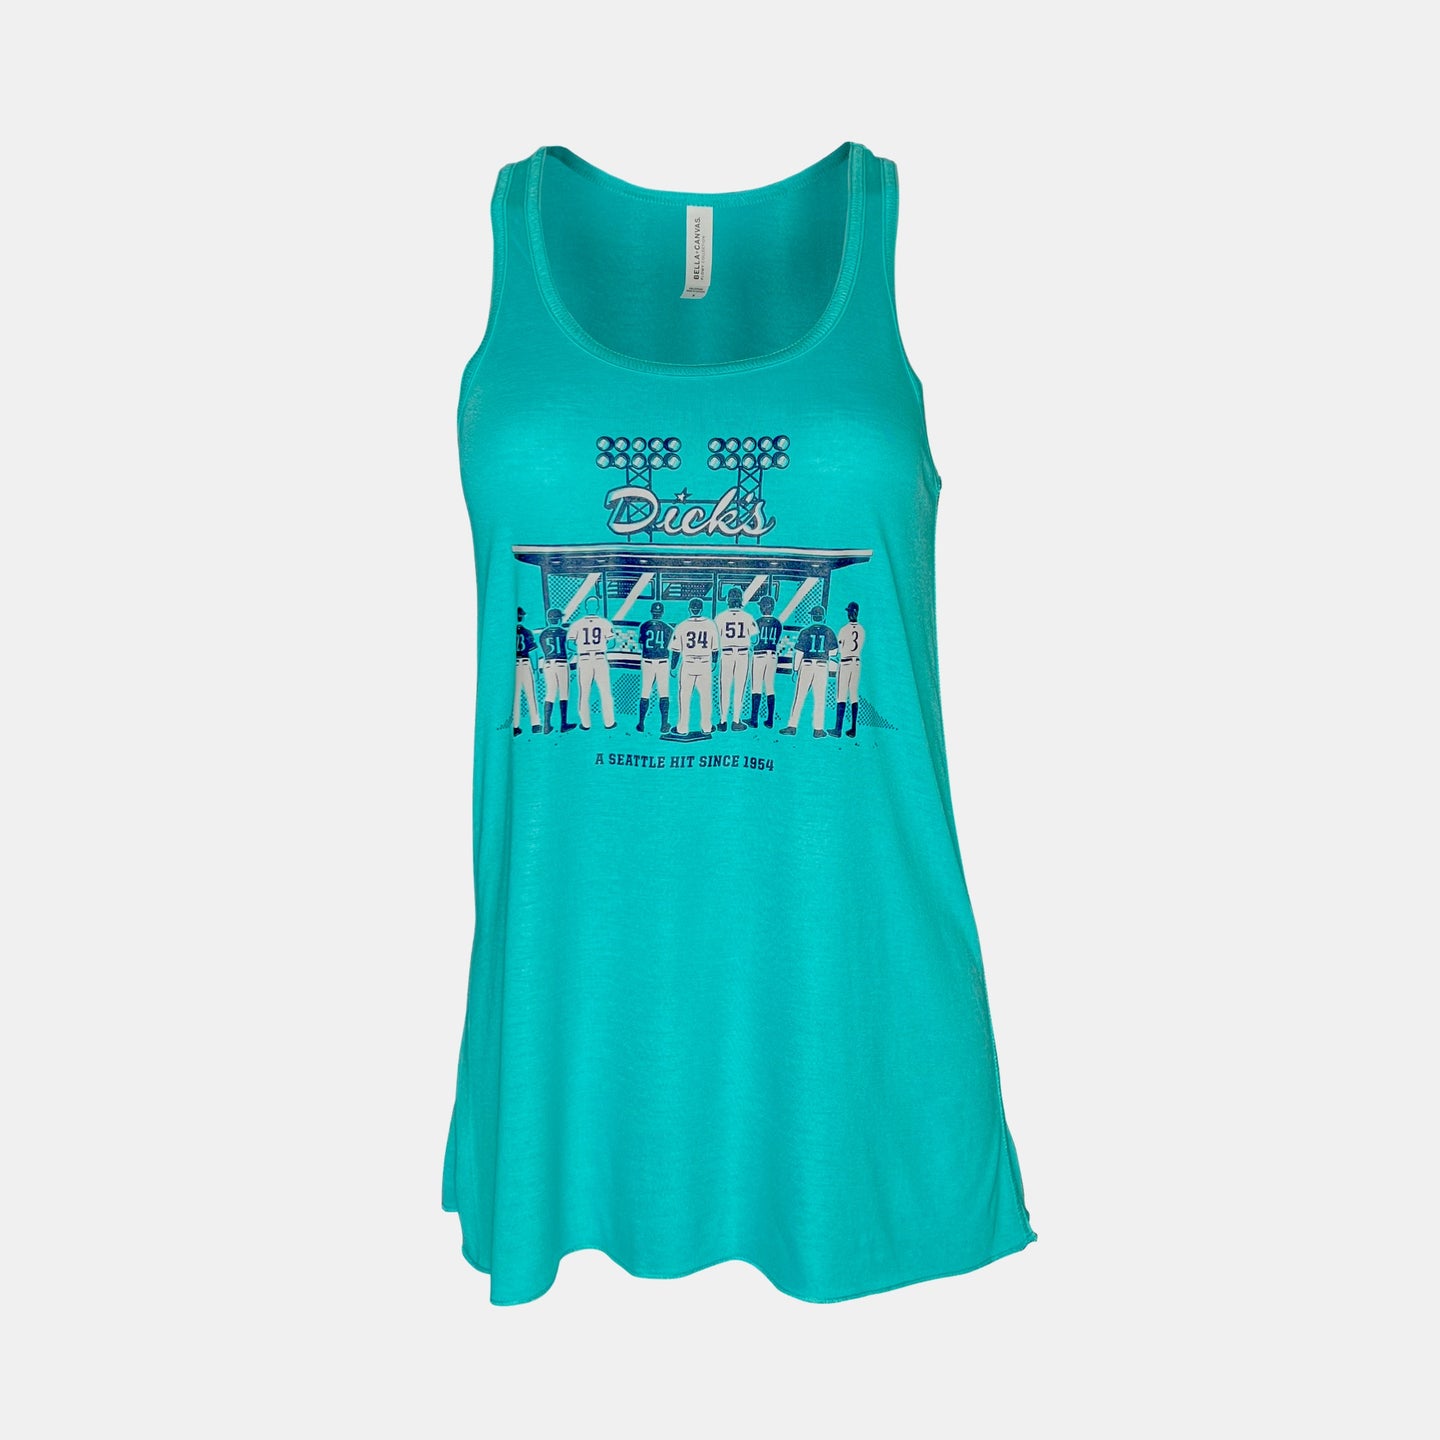 Teal tank w/ navy/gray graphic of 9 baseball players facing the Dick's Drive-In window & A Seattle Hit Since 1954 tagline